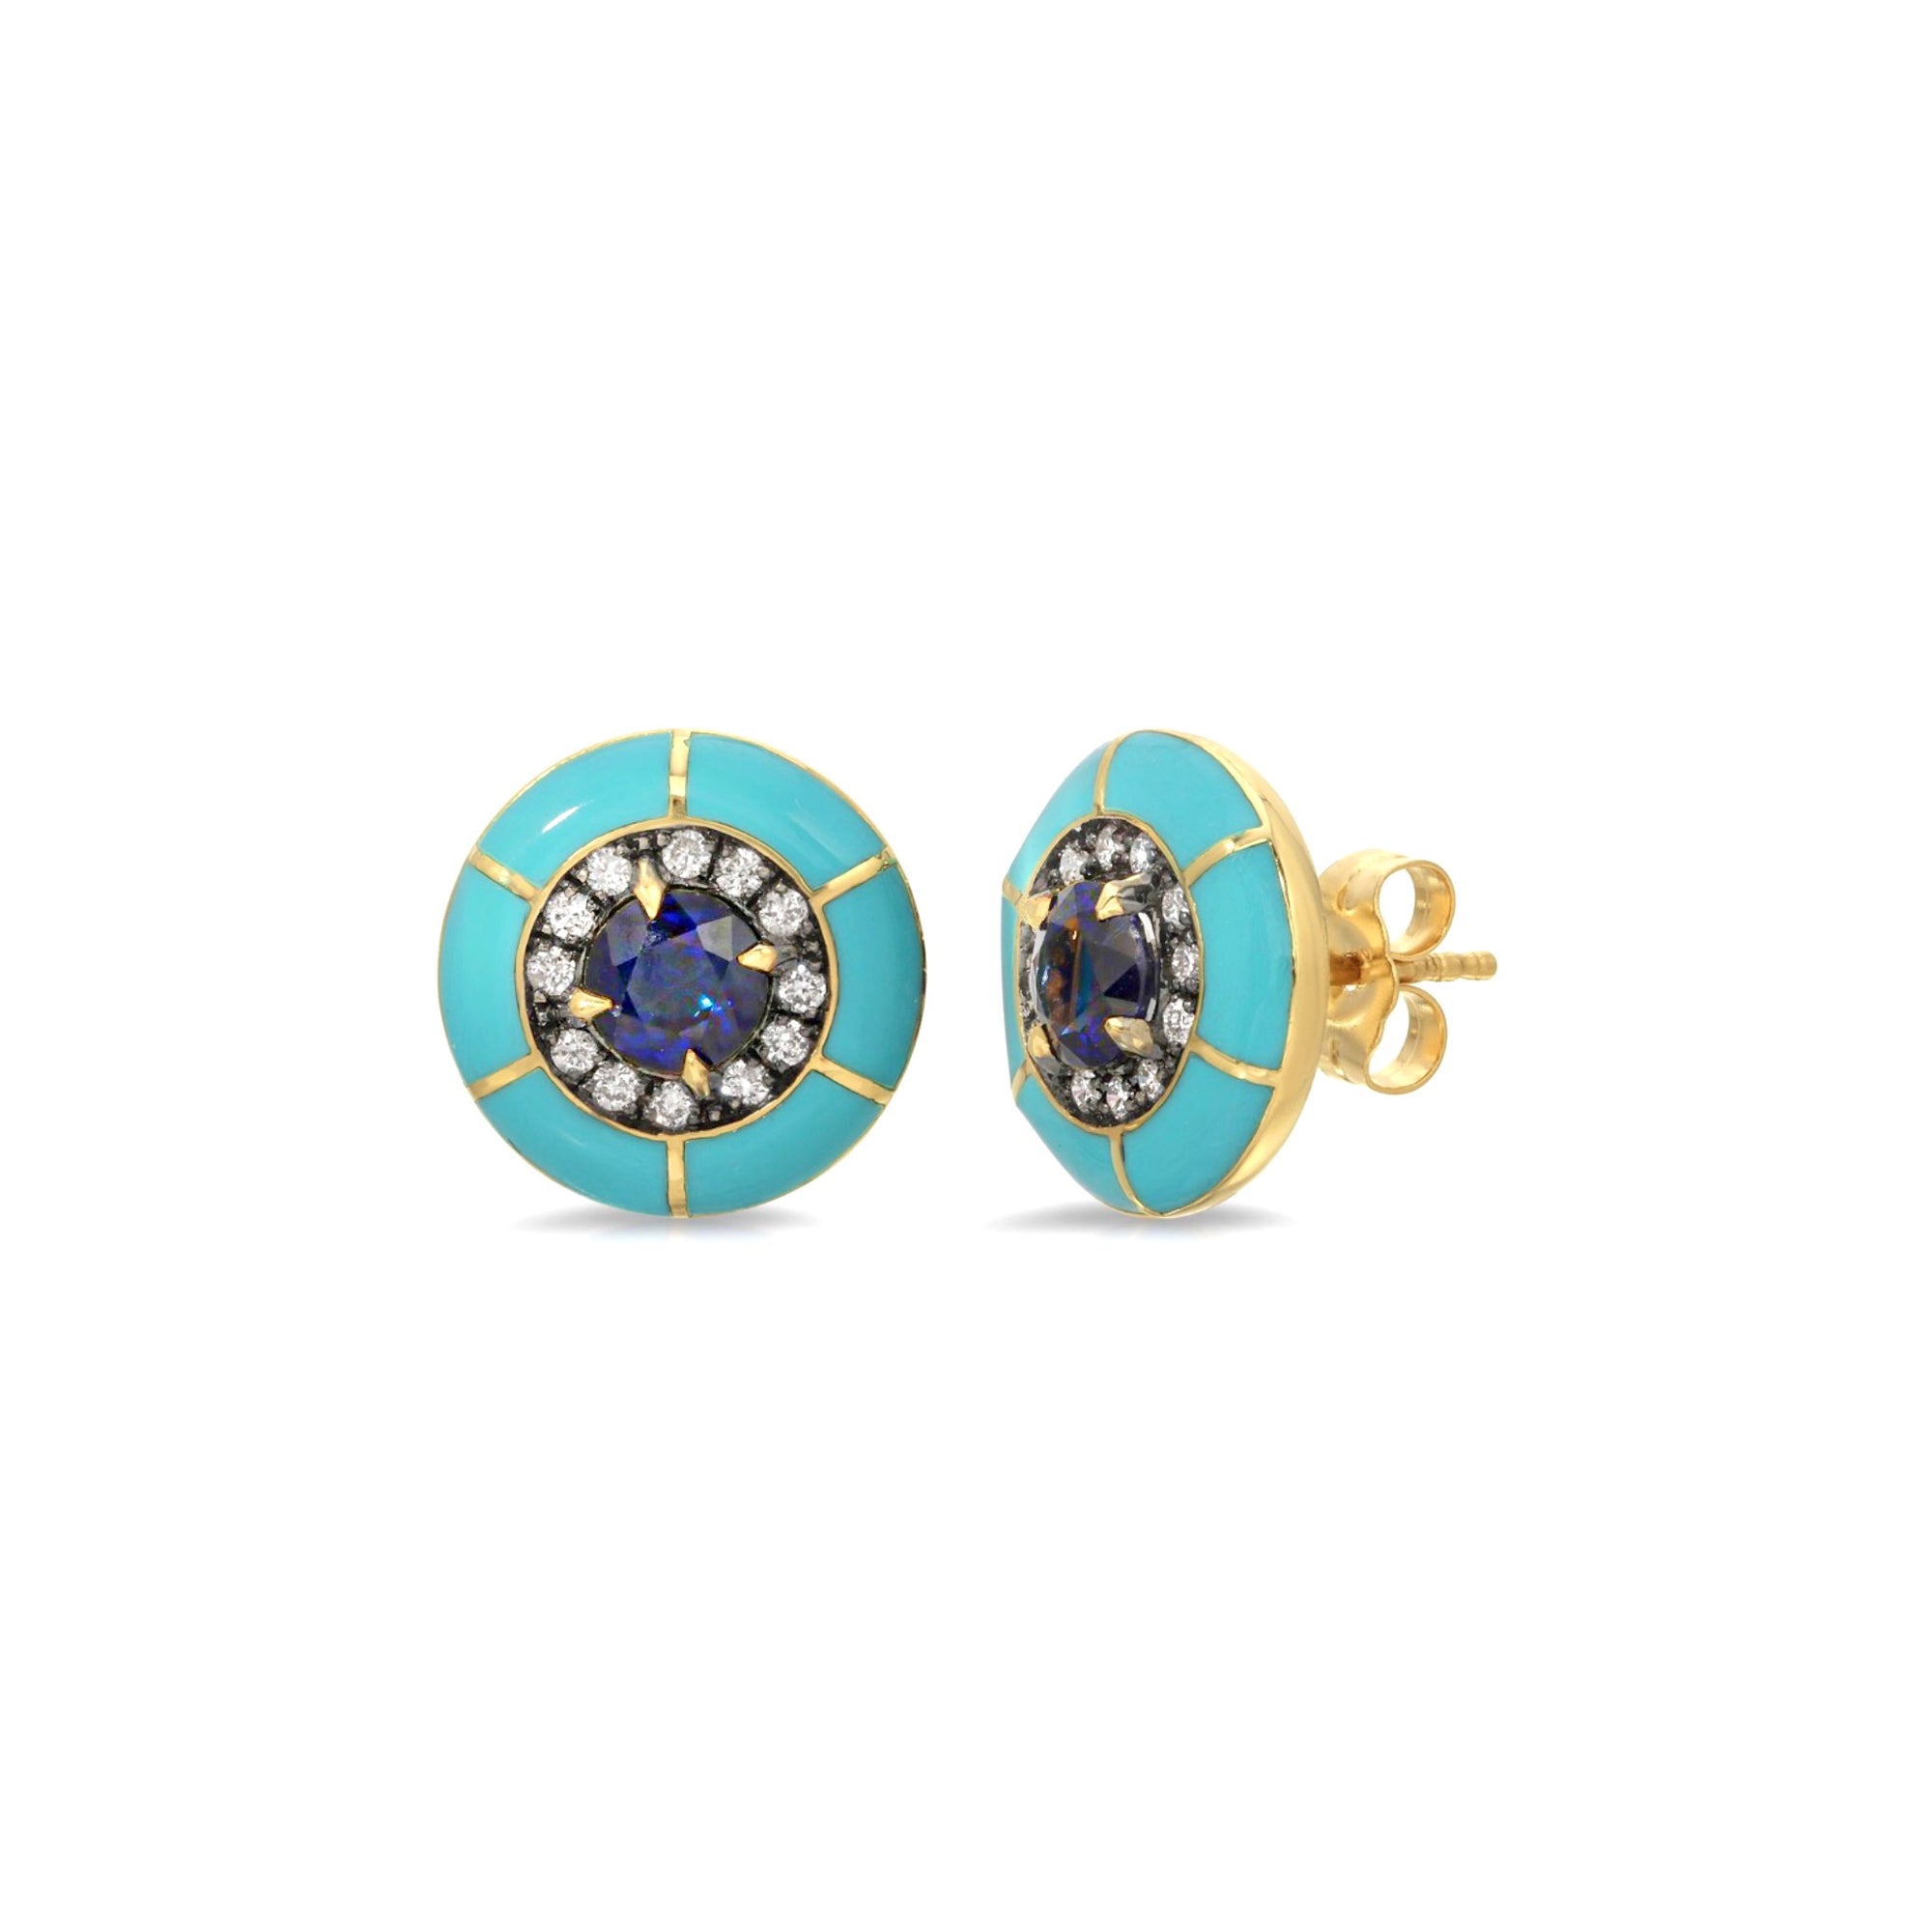 Sapphire & Enamel Stud Earrings by Lord Jewelry available at Talisman Collection Fine Jewelers in El Dorado Hills, CA and online. For a classic look, these Sapphire and Enamel Stud Earrings are an absolute must-have. The 18k earrings feature 1.16 cts of round faceted sapphires surrounded by 0.20 cts of diamond accents and aqua blue enamel for a preppy and ladylike touch. Their bright and preppy aesthetic will add just the right touch of cheerfulness to your look.